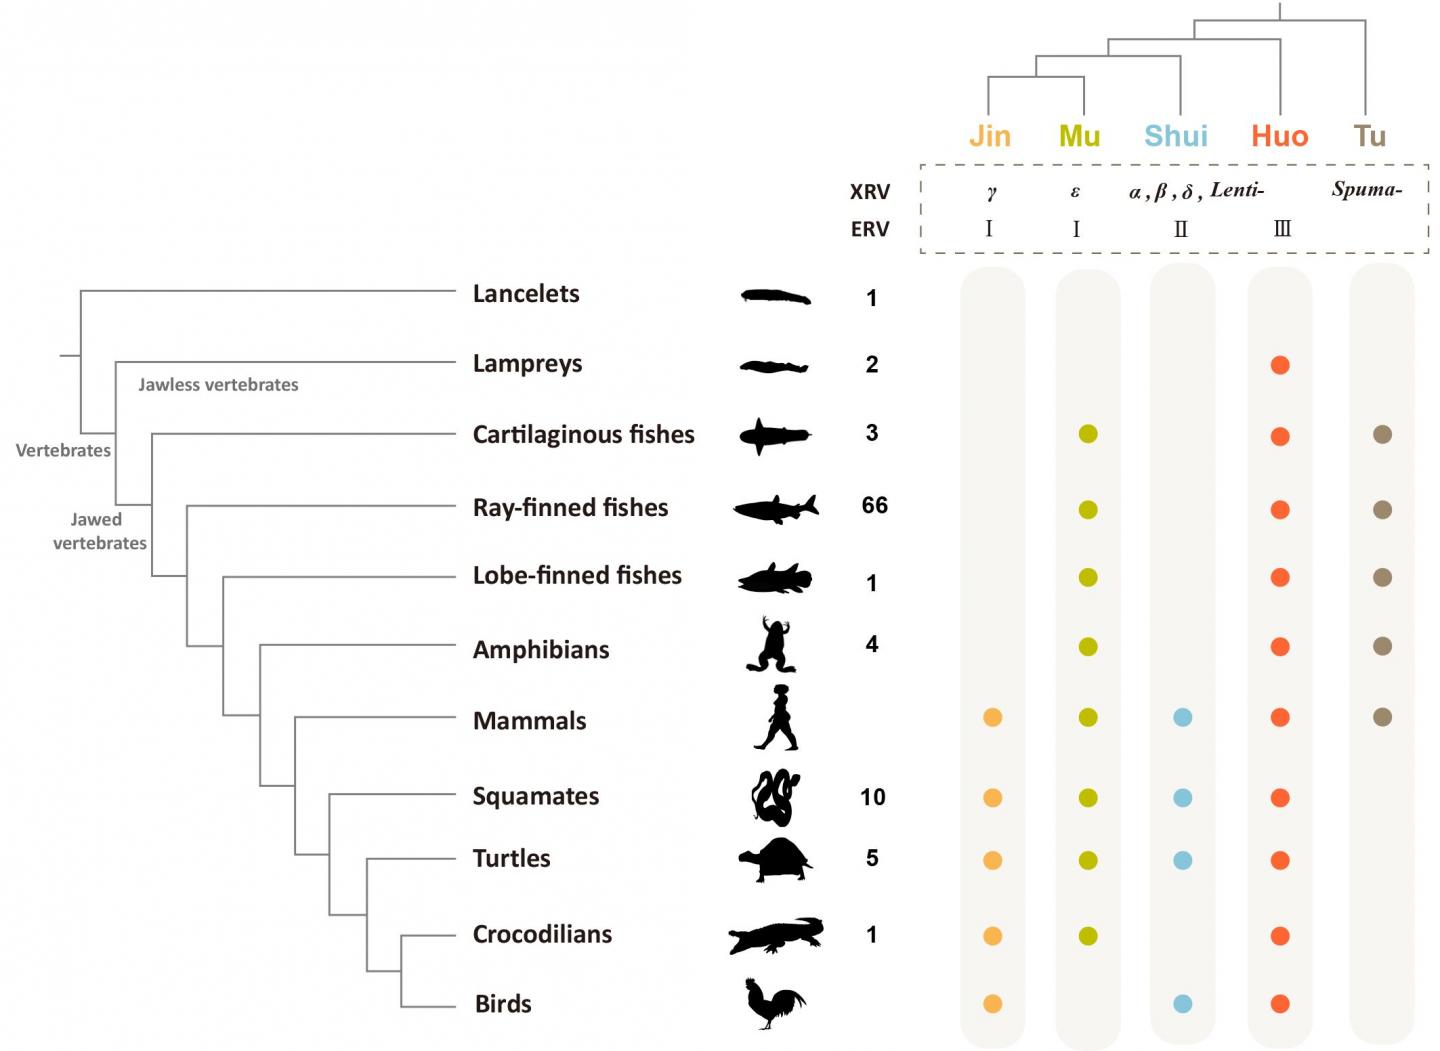 DNA 'Fossils' in Fish, Amphibians, and Reptiles Reveal Deep Diversity of Retroviruses